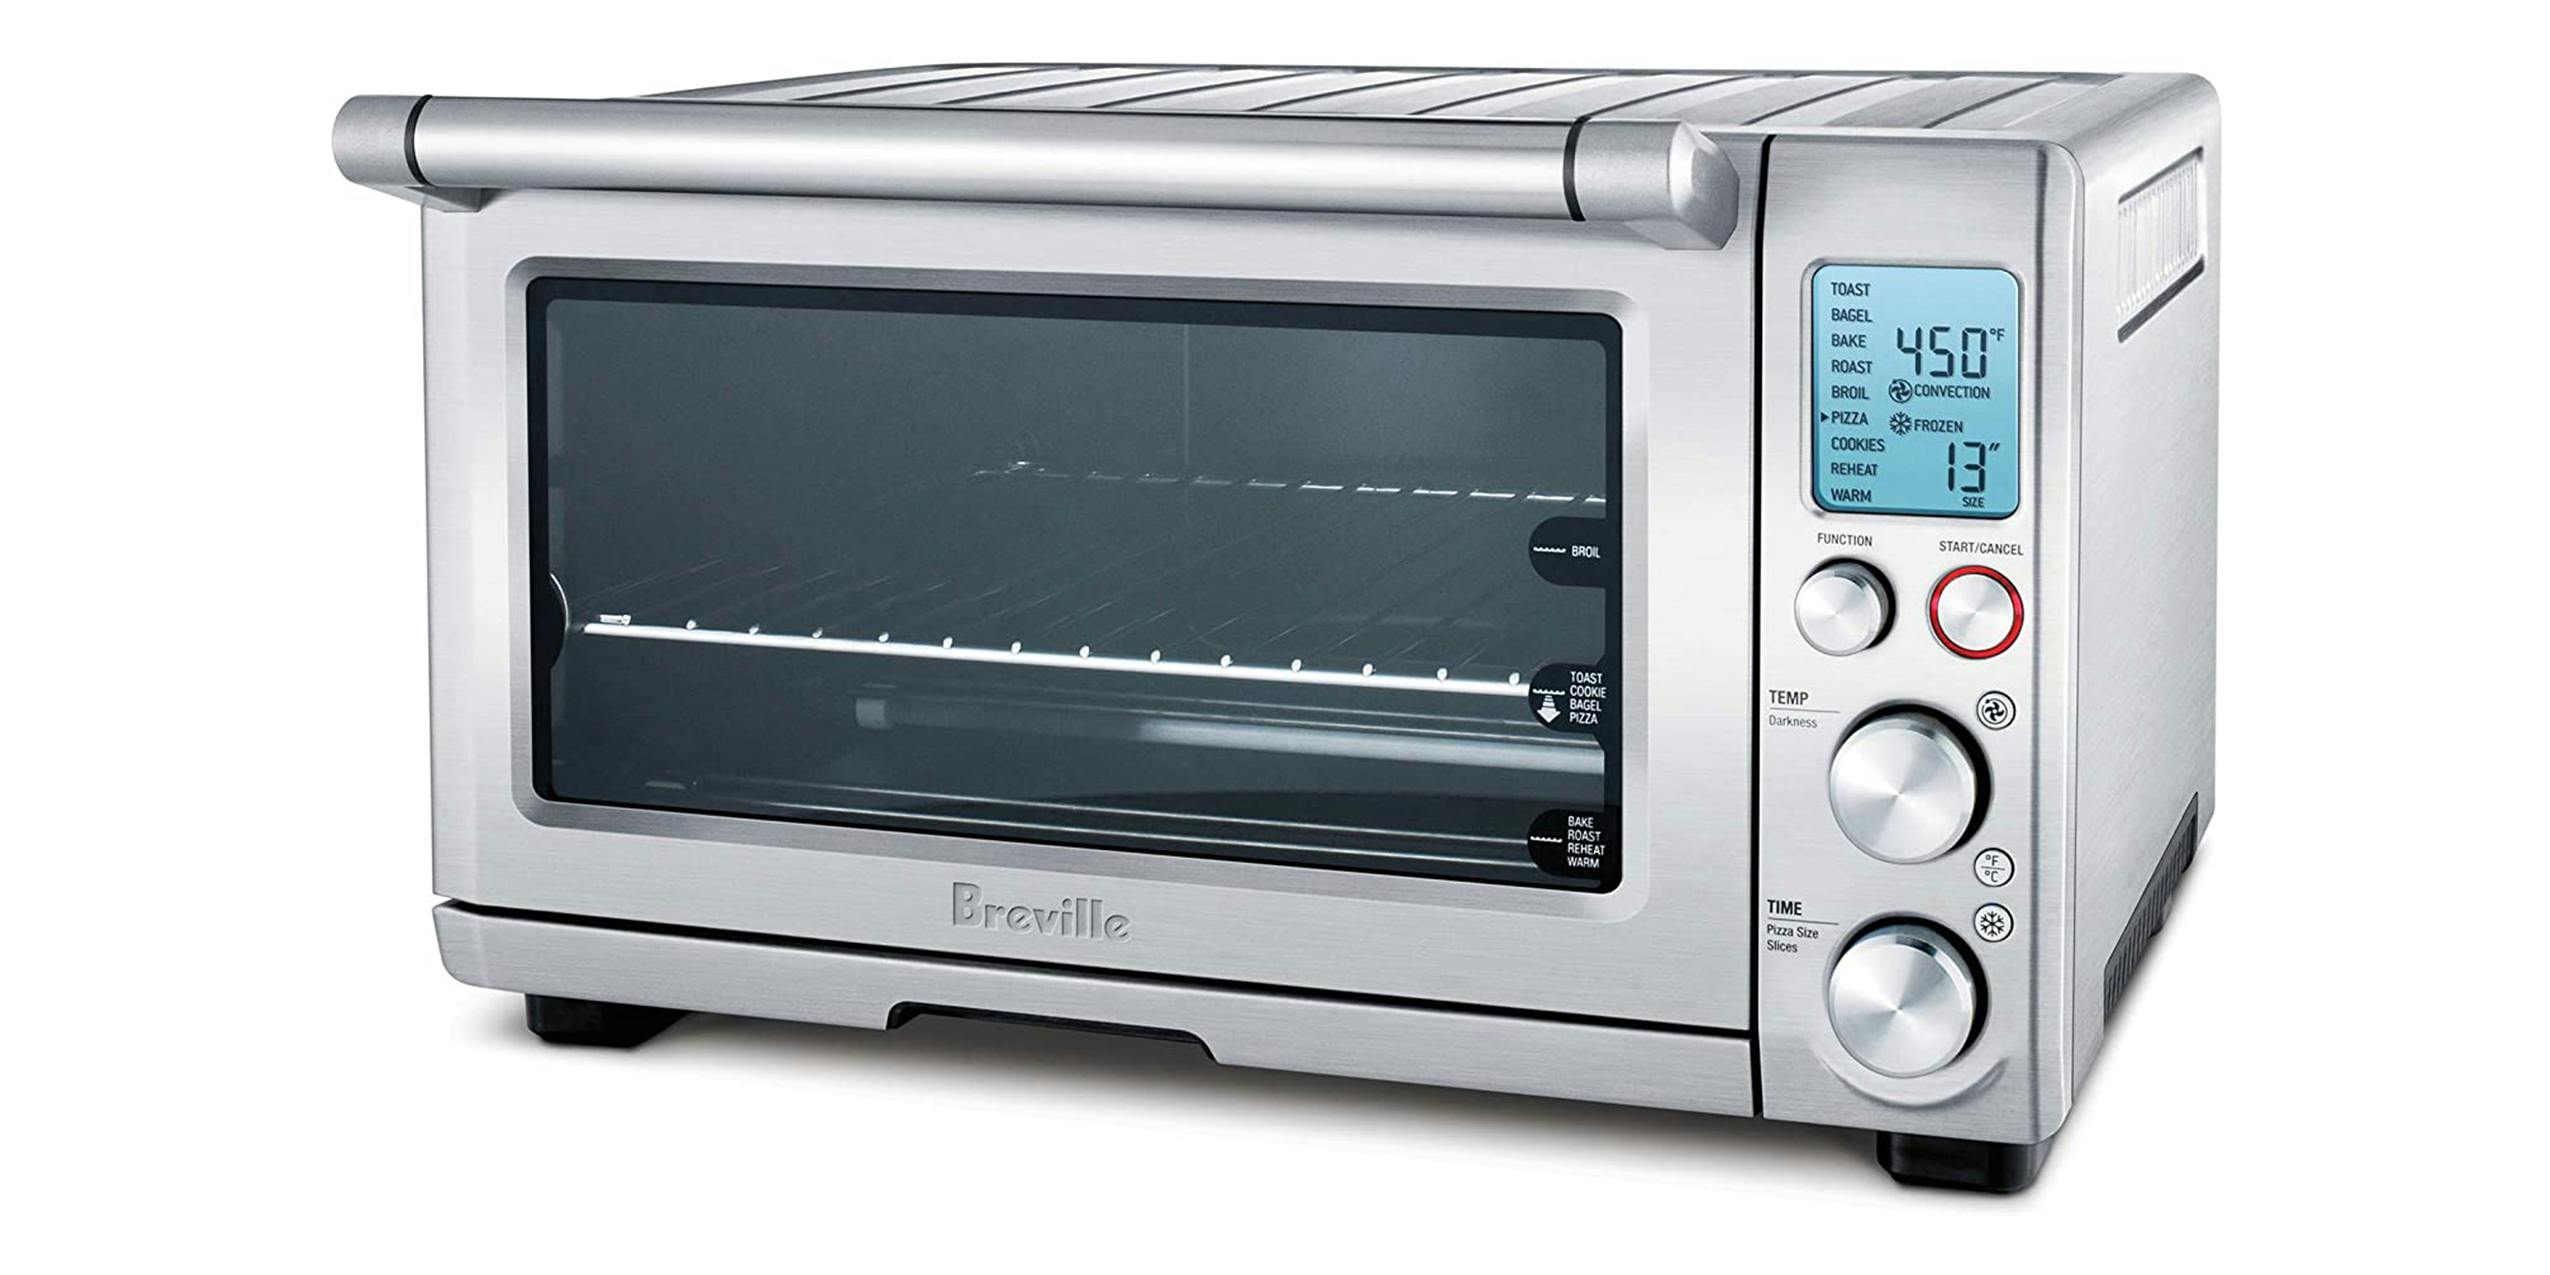 A product image for the Breville Smart Oven, one of the best countertop ovens on Amazon.